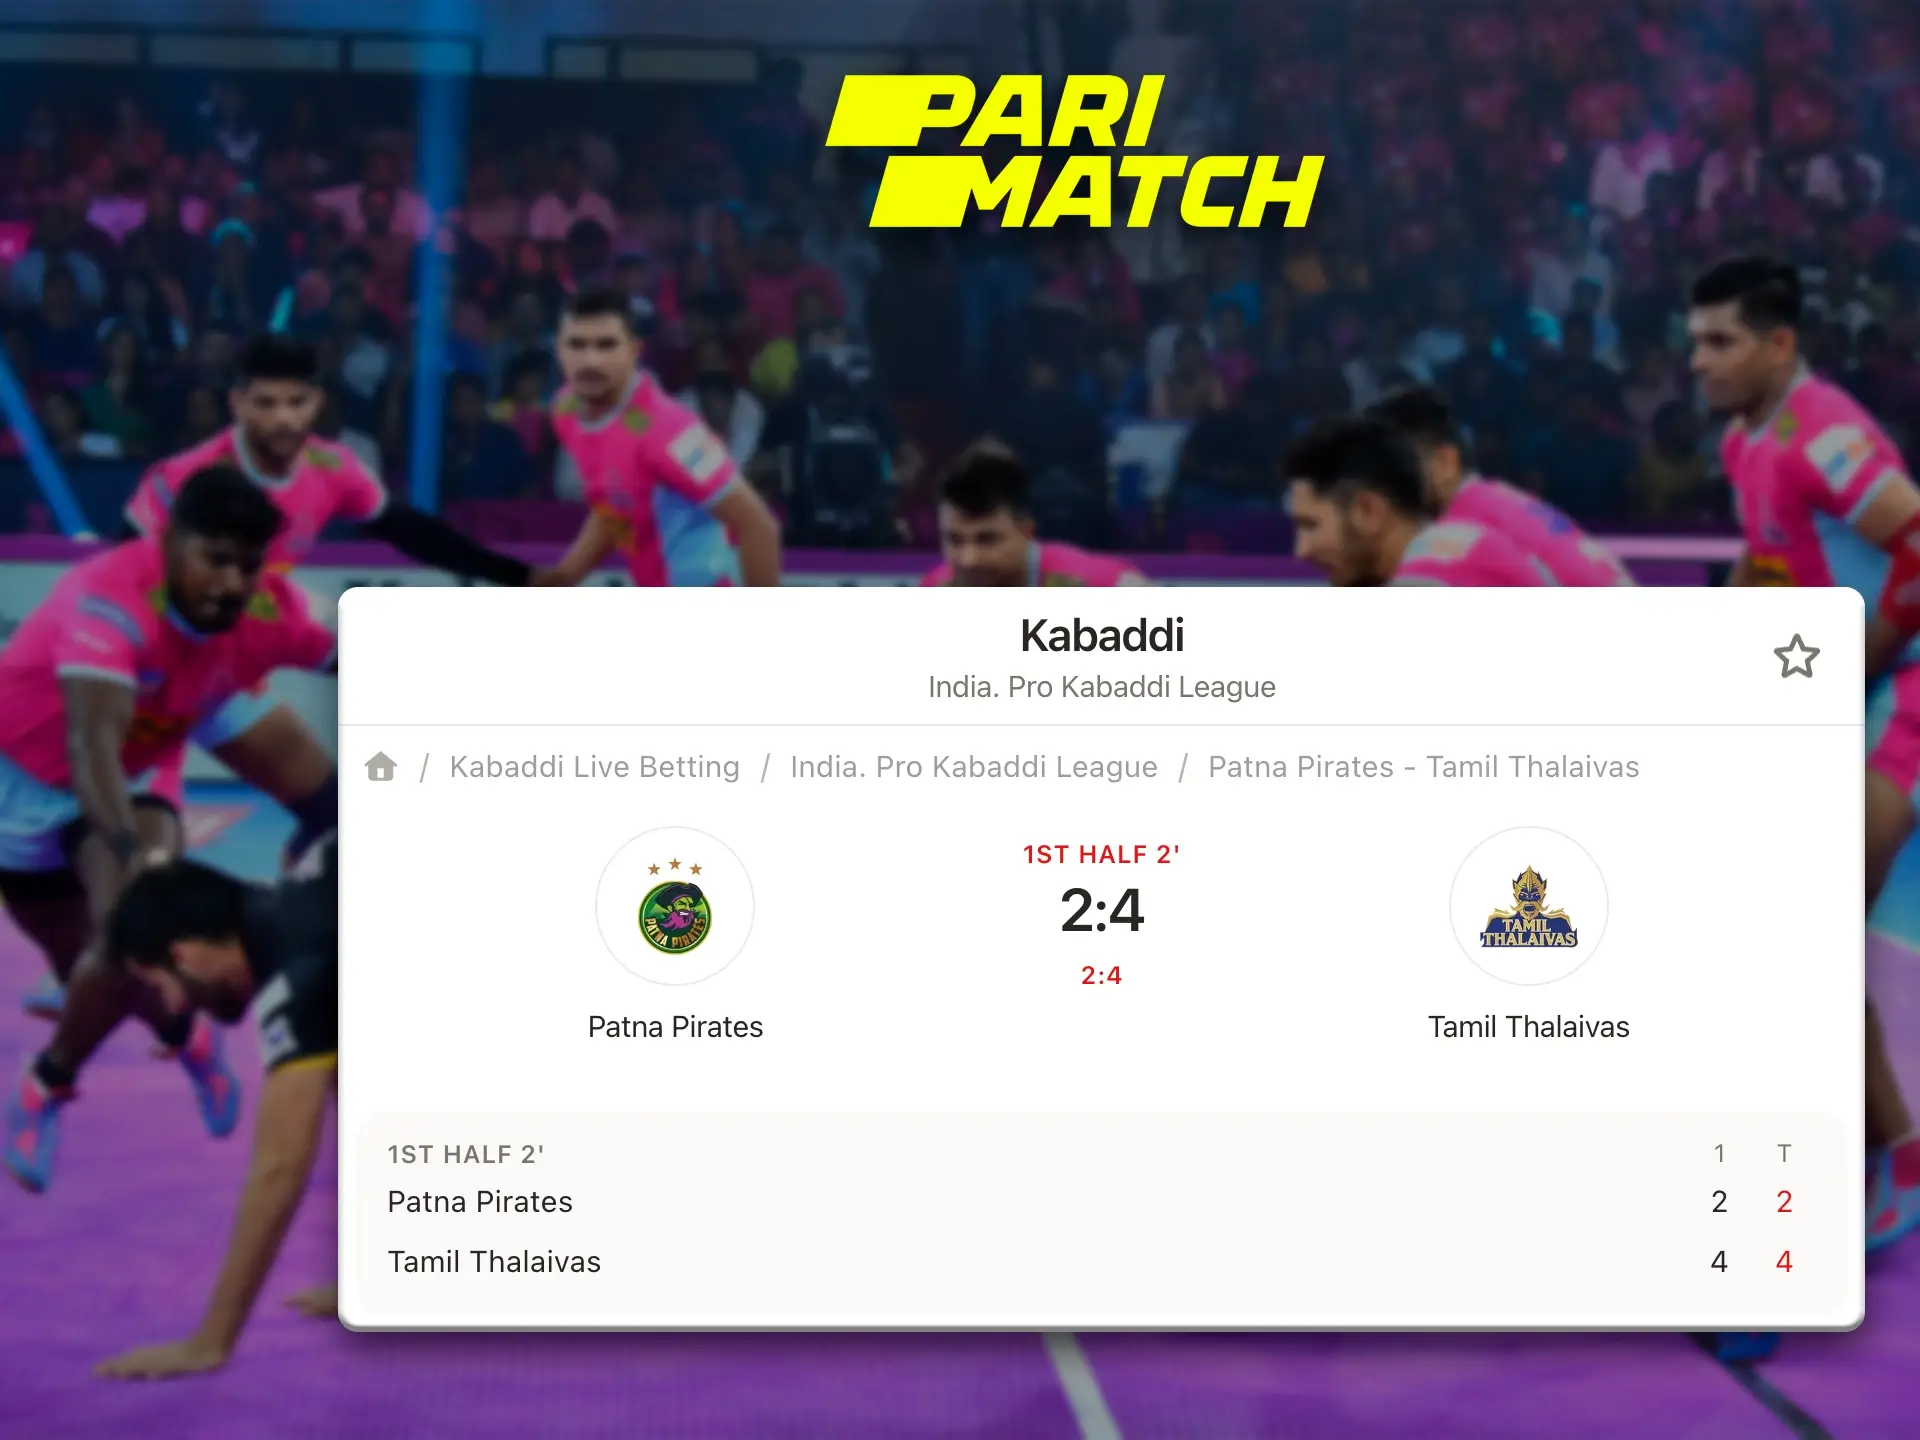 Follow Kabaddi's games live in high quality on Parimatch.